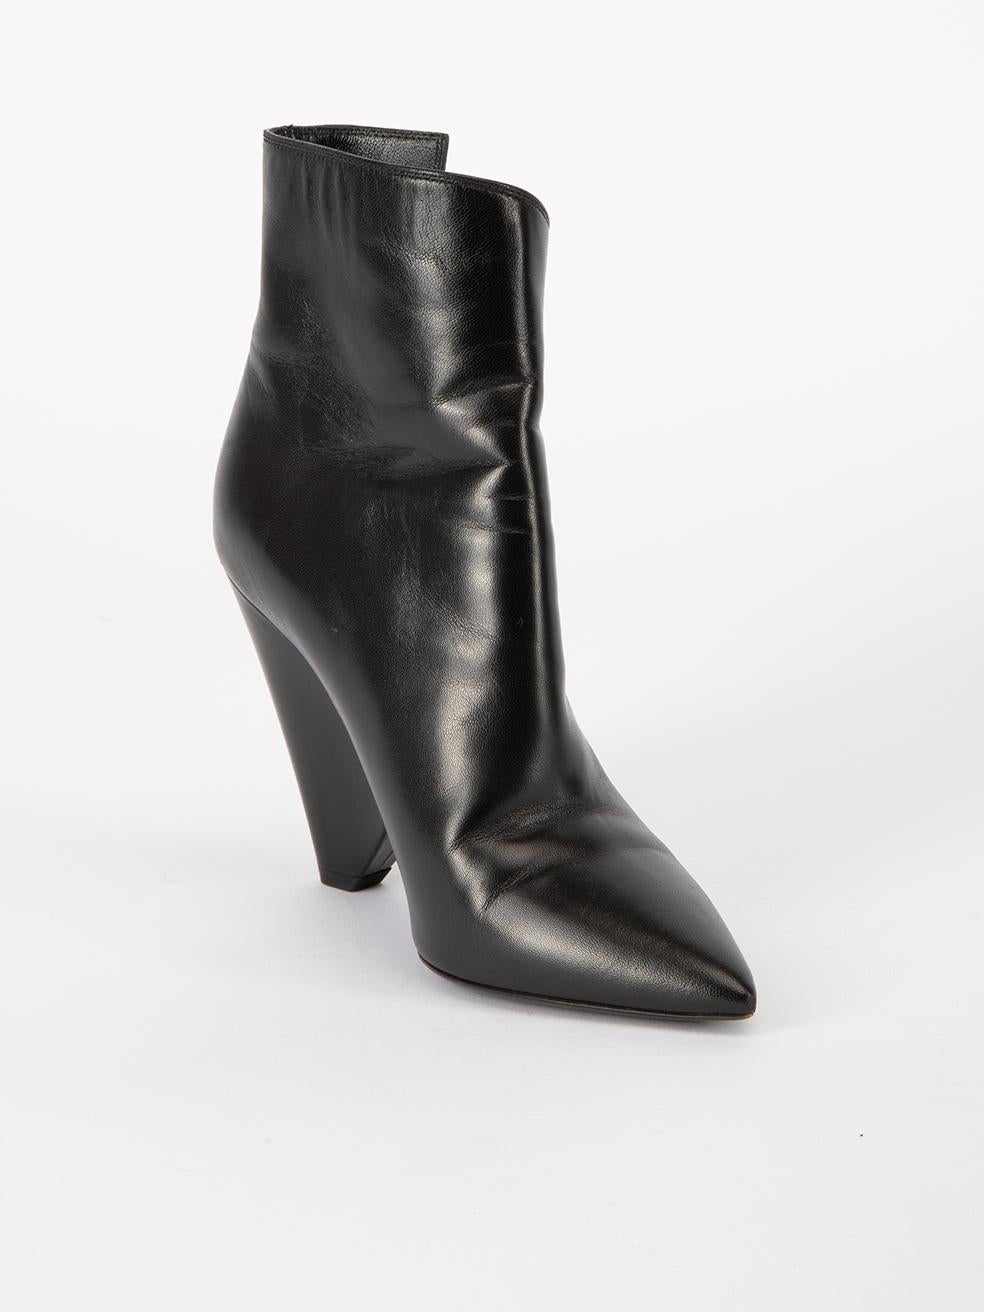 CONDITION is Very good. Minimal wear to shoes is evident. Minimal creasing to leather exterior material and light wear to toe points on this used Saint Laurent designer resale item.   Details  Black Leather Ankle boots Pointed toe High wedge heel